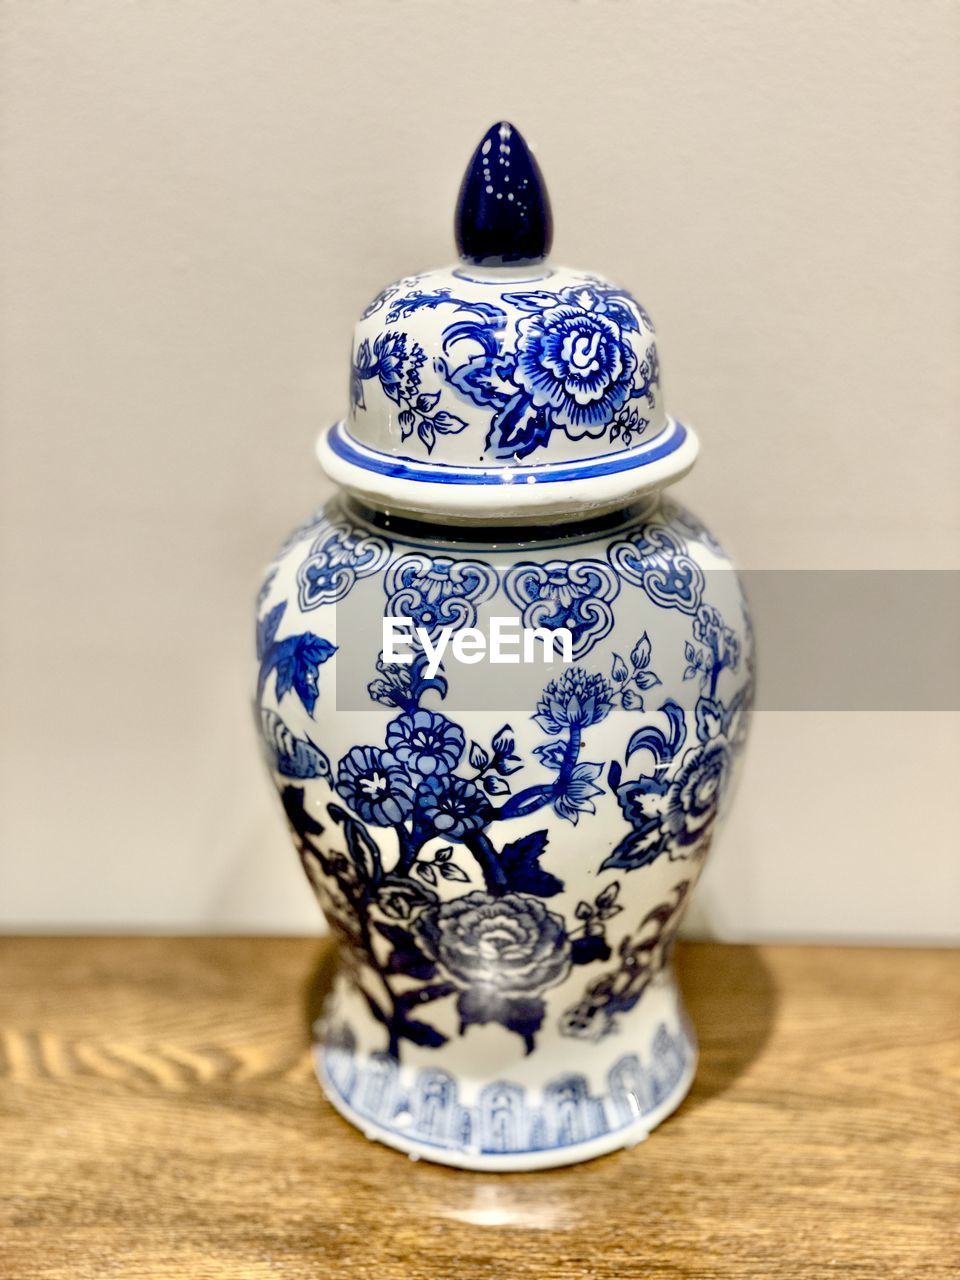 blue and white porcelain, ceramic, porcelain, craft, vase, pattern, indoors, pottery, ancient, art, history, no people, floral pattern, blue, cobalt blue, decoration, table, ornate, the past, art product, craft product, close-up, single object, container, classical style, still life, architecture